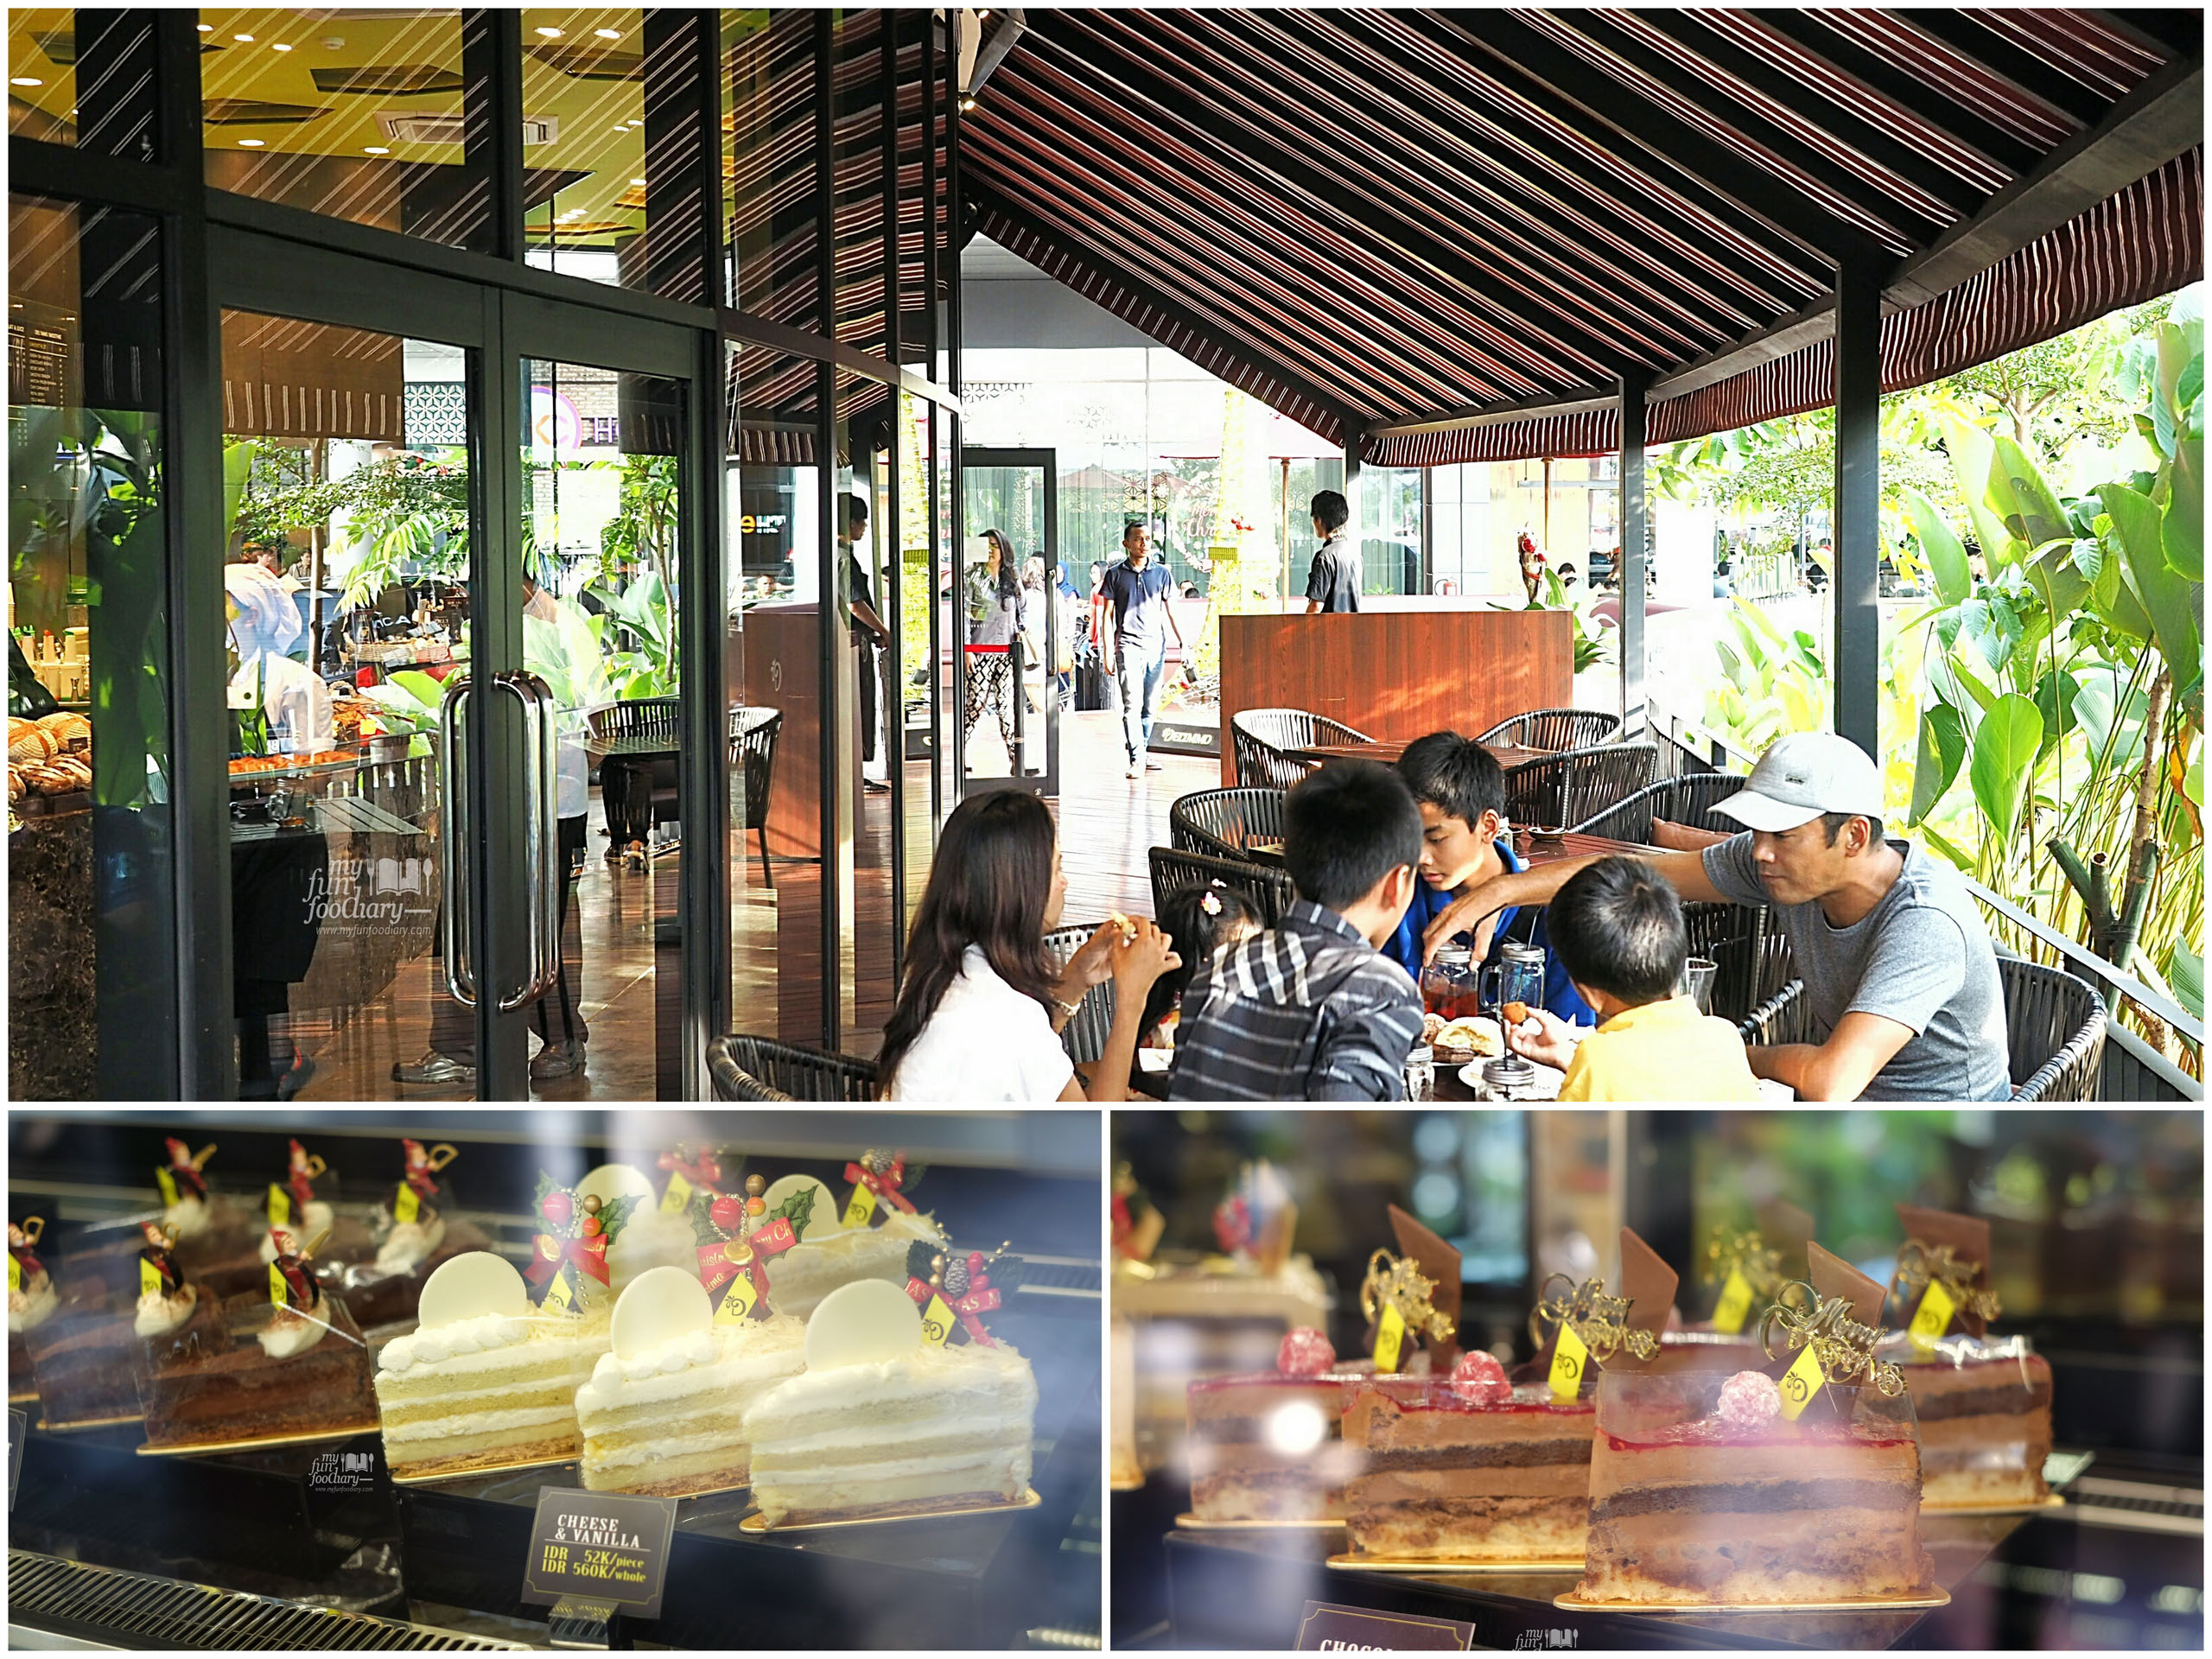 Outdoor Ambiance and Cake Display at Del' Immo Patisserie BSD by Myfunfoodiary